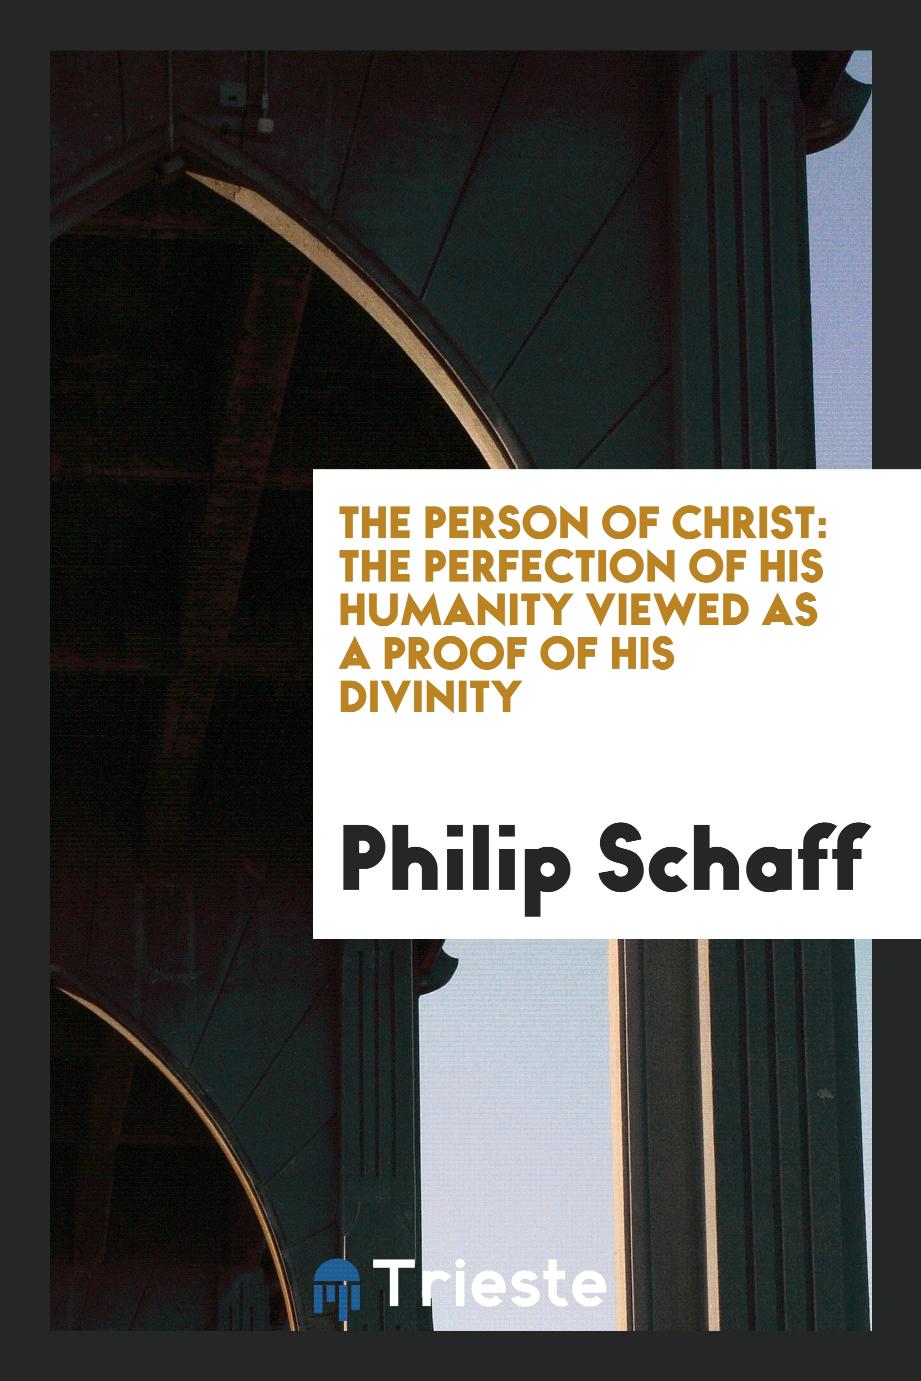 The Person of Christ: The Perfection of His Humanity Viewed as a Proof of His Divinity